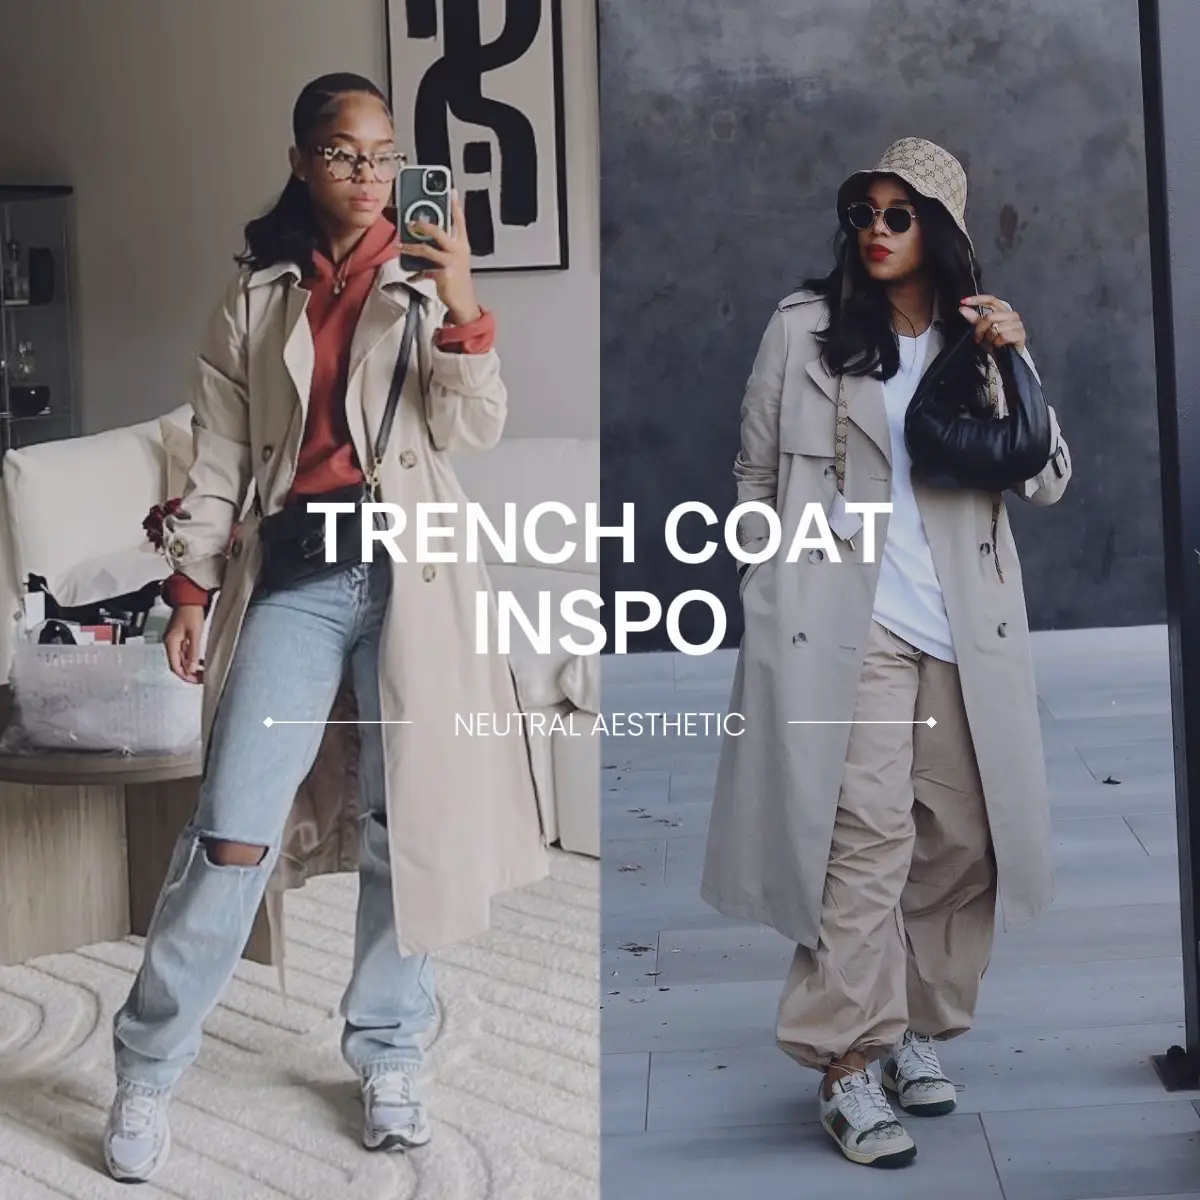 CARLY TRENCH COAT OUTFIT INSPIRATION